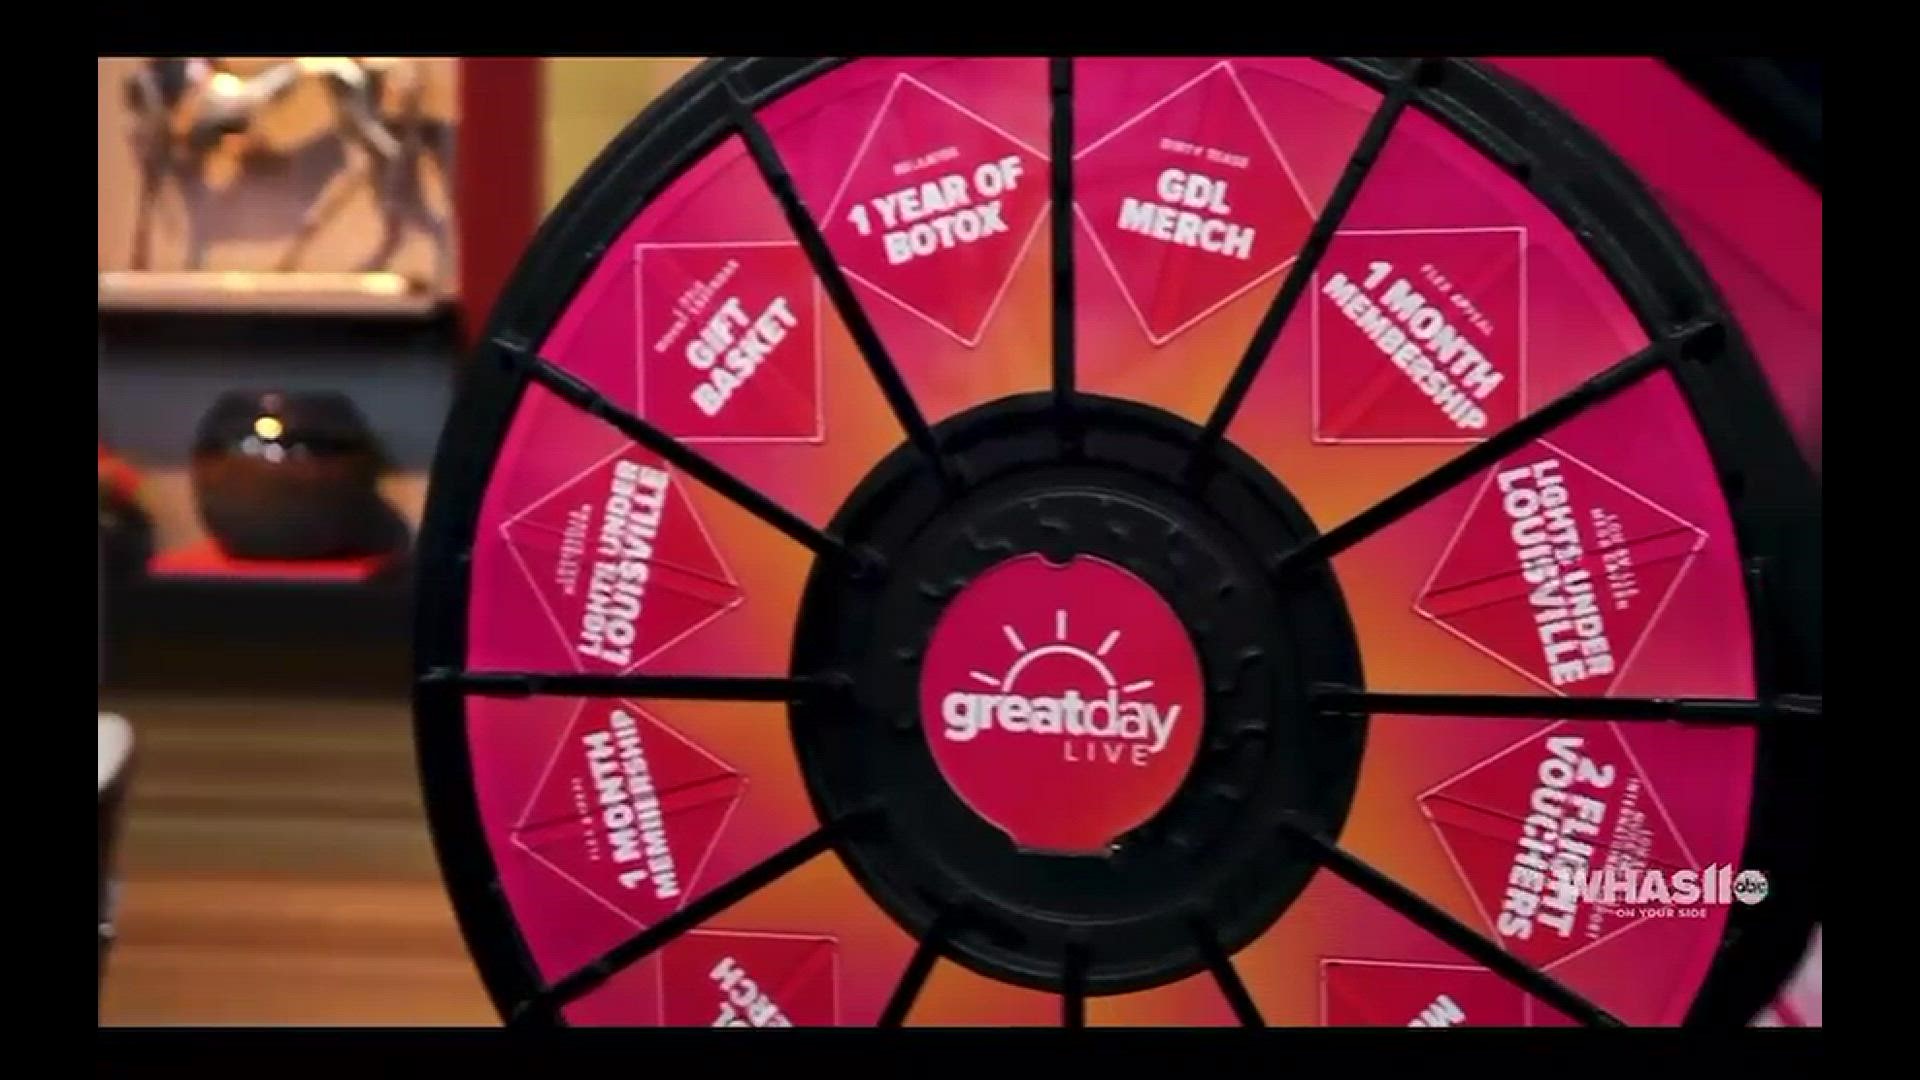 Spin to win with the GDL Prize Wheel Sweepstakes! To register, visit https://ul.ink/121K6.